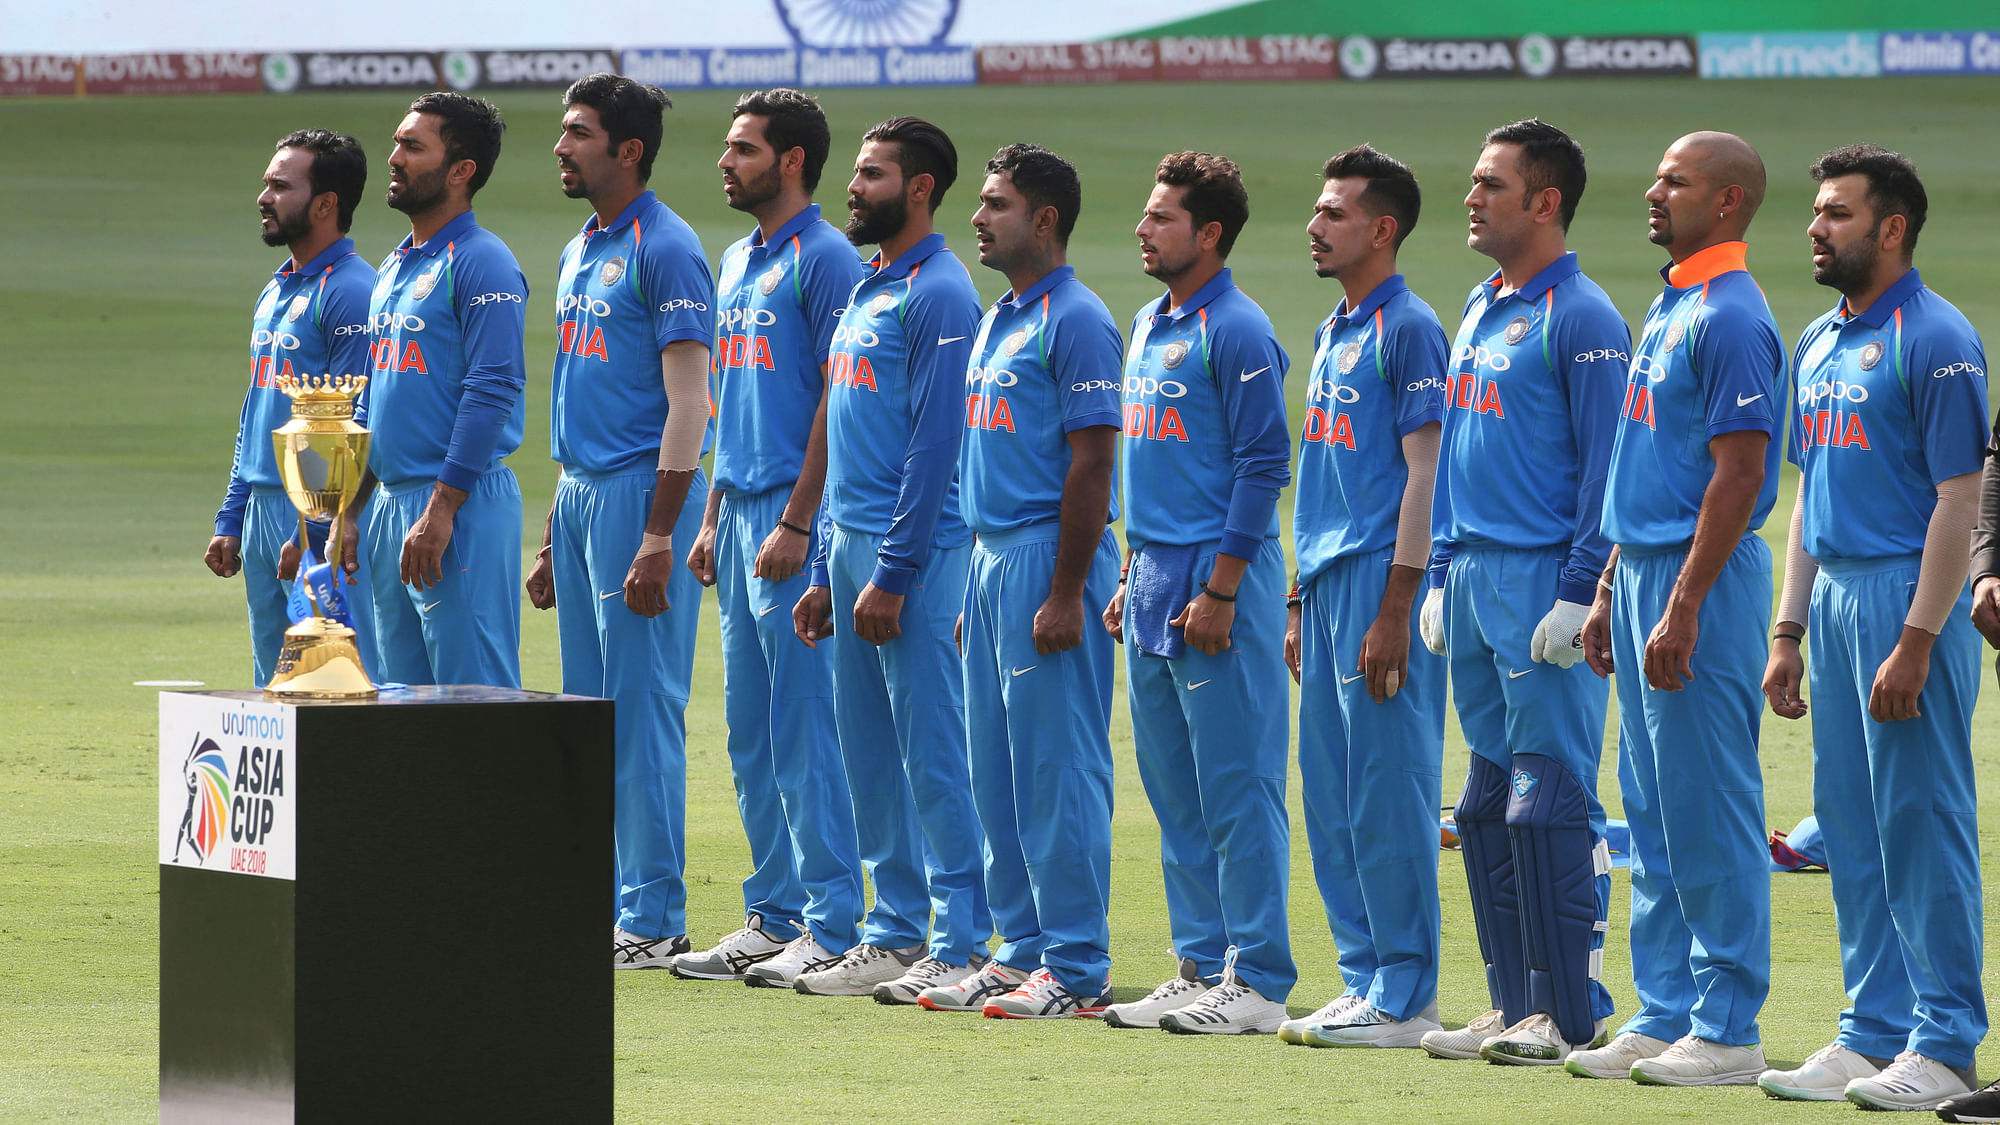 India play Pakistan in the Super Four round of the Asia Cup on Sunday.&nbsp;